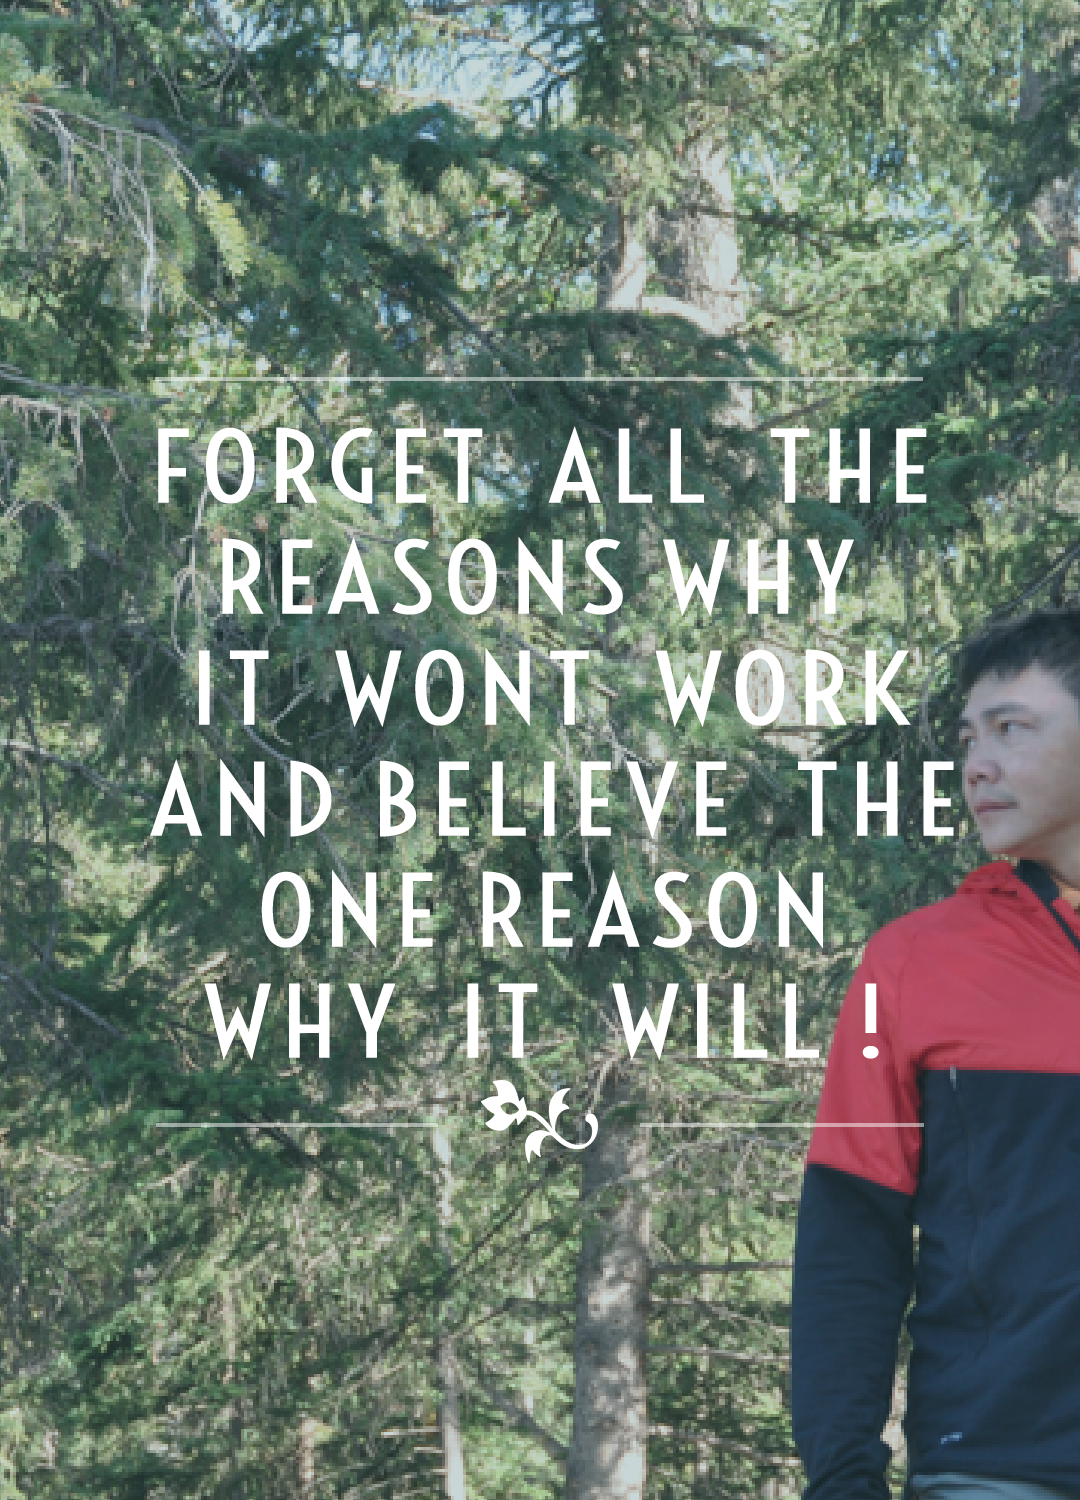 Forget all the reasons why it won't work